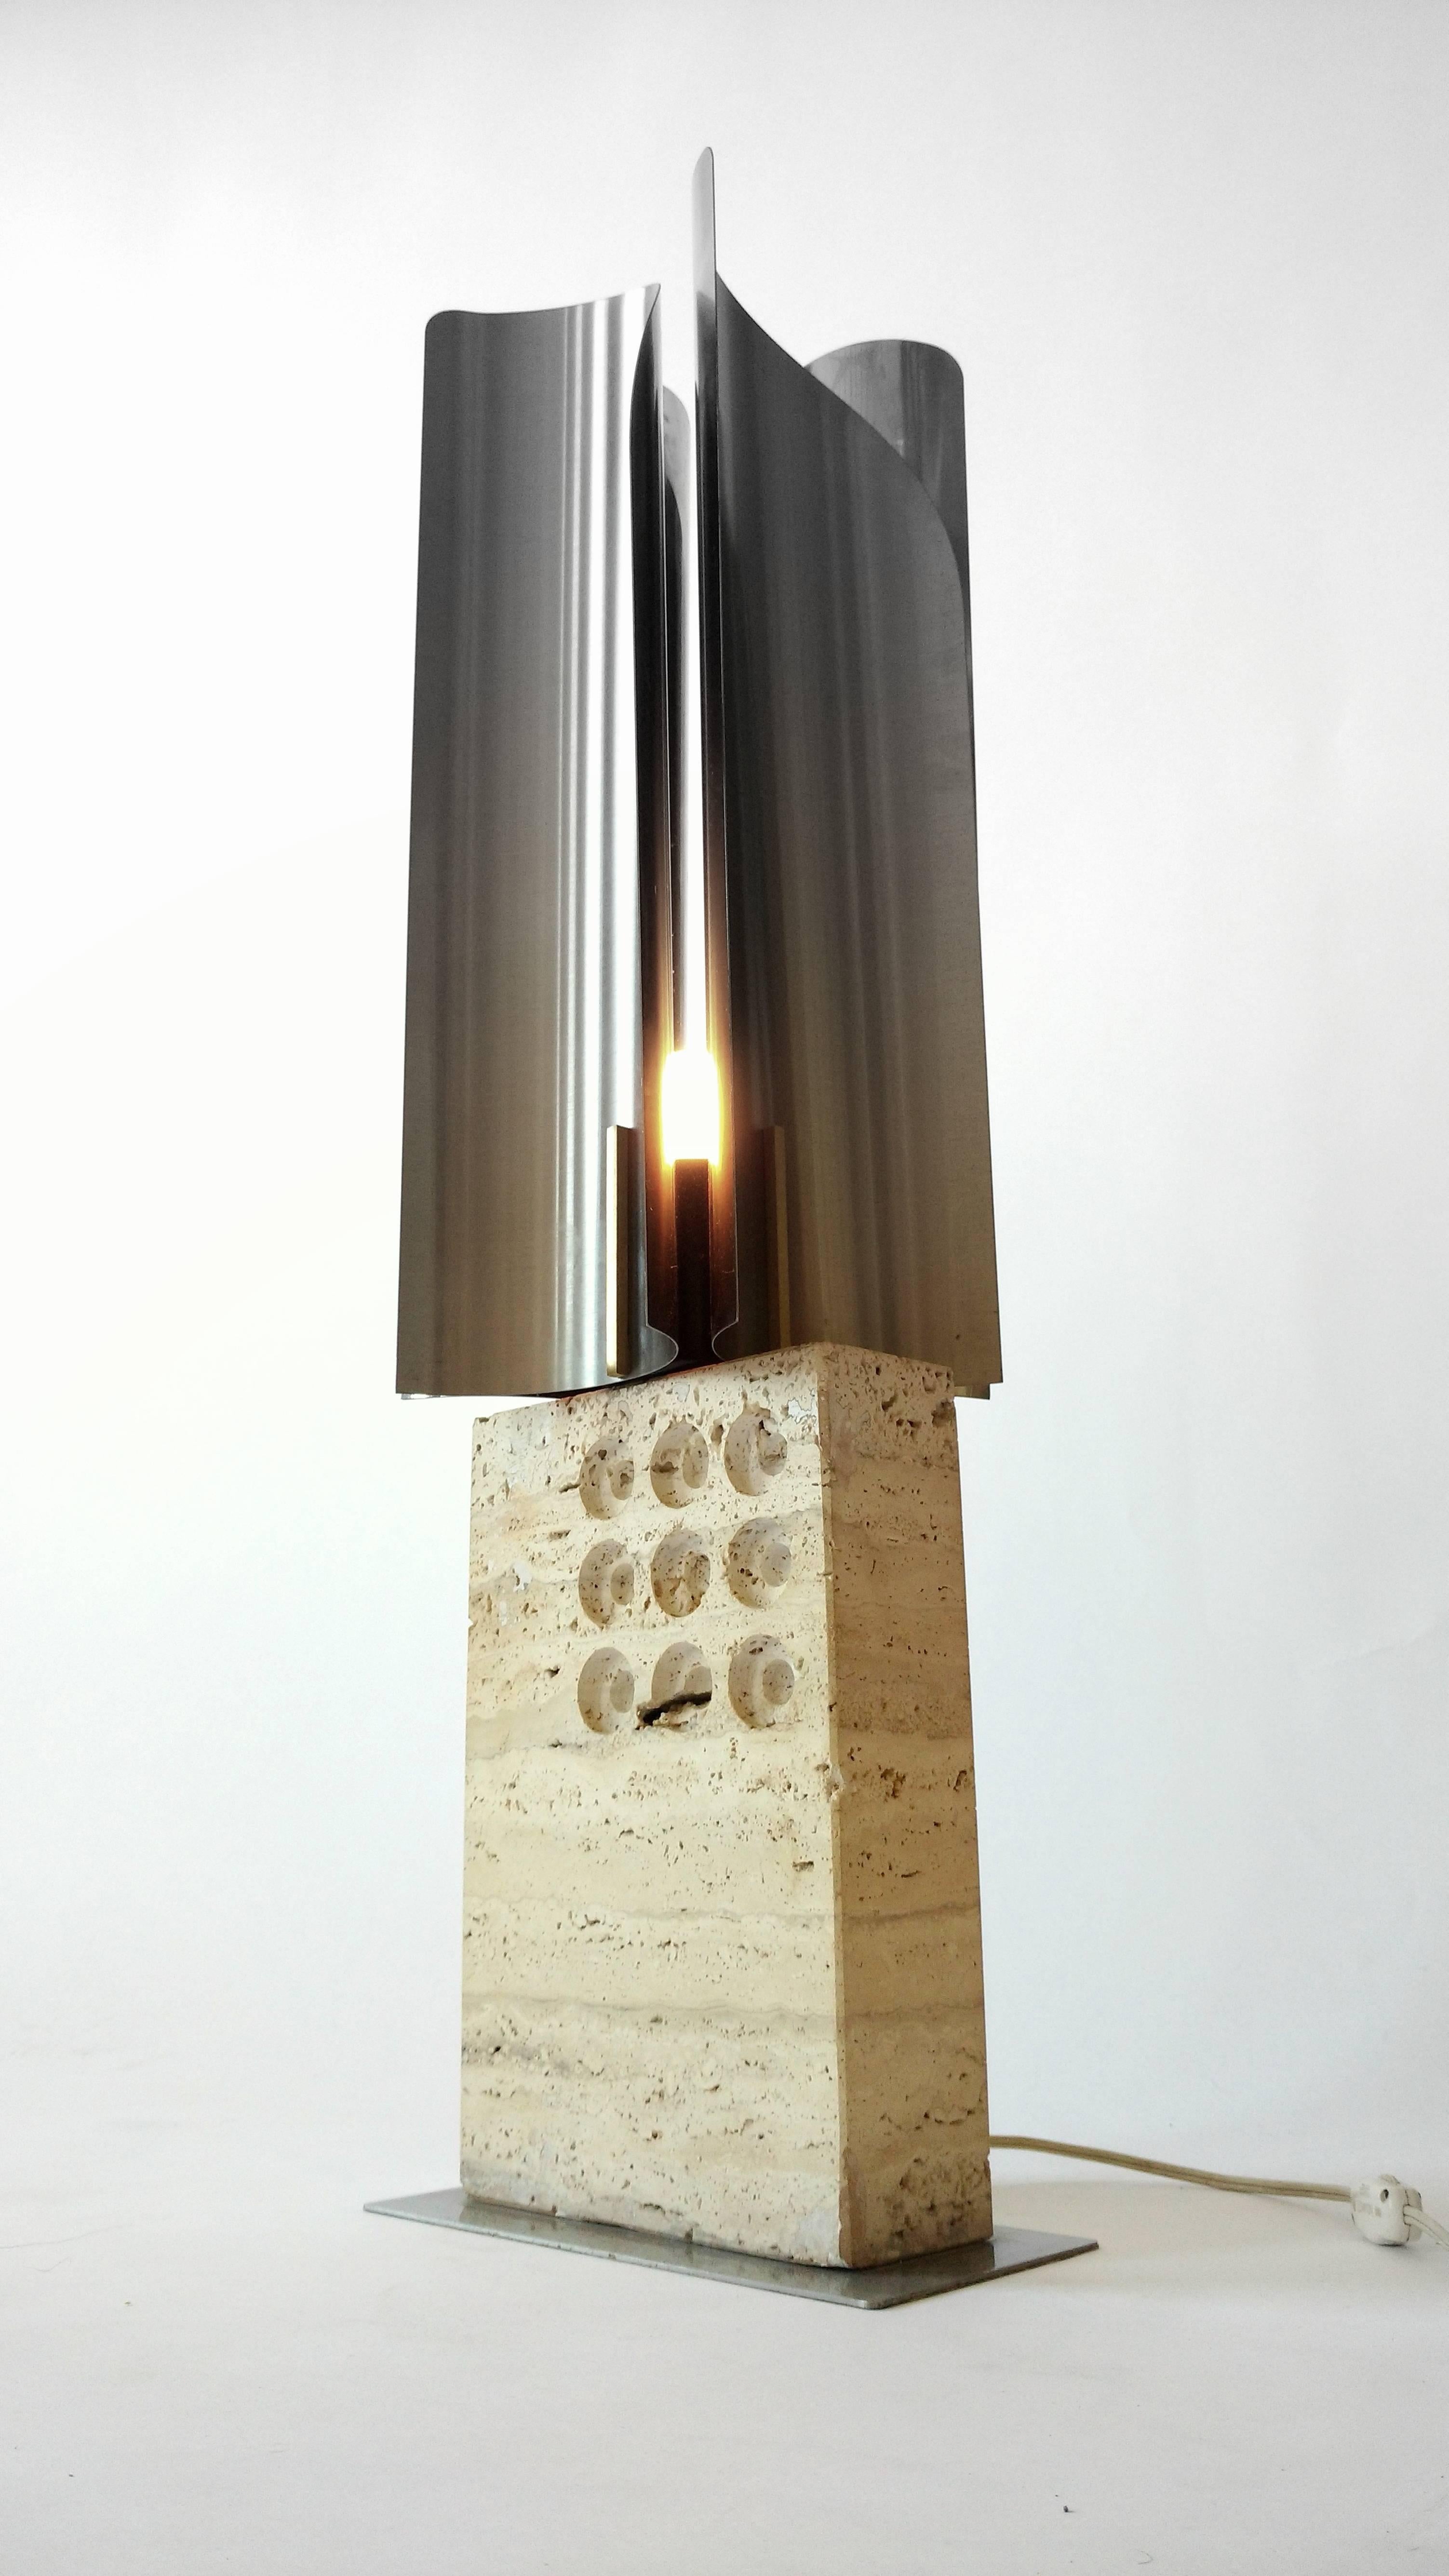 Italian lighting art piece from Reggiani
Travertine, stainless steel and brass accent

Regular E26 North American socket

Measure 31 inches high . Travertine base is  8 in. wide by 3 in. thick  

Stainless steel sculpture/shade is 8 in. wide 